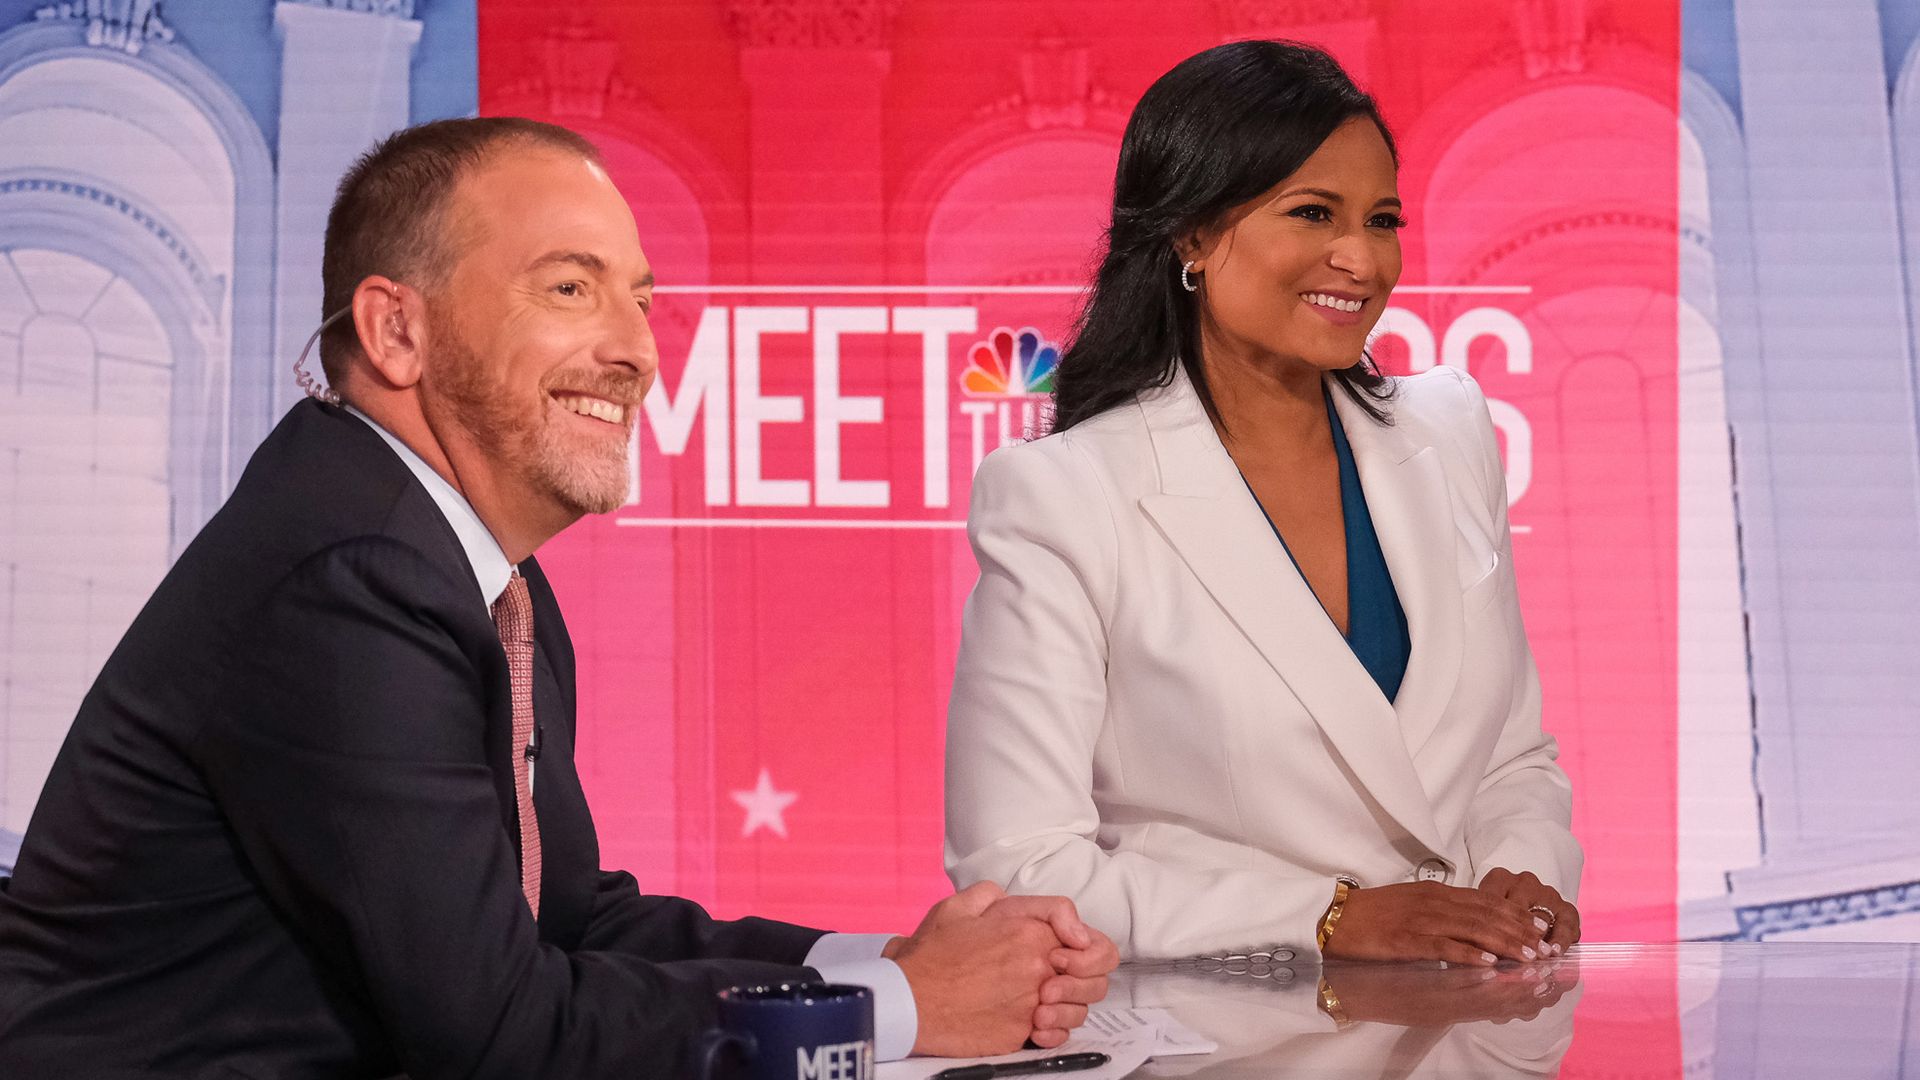 Moderator Chuck Todd, Kristen Welker, NBC News Chief White House Correspondent, and NBC News Justice Correspondent Pete Williams appear on Meet the Press in Washington, D.C. Sunday, July 31, 2022